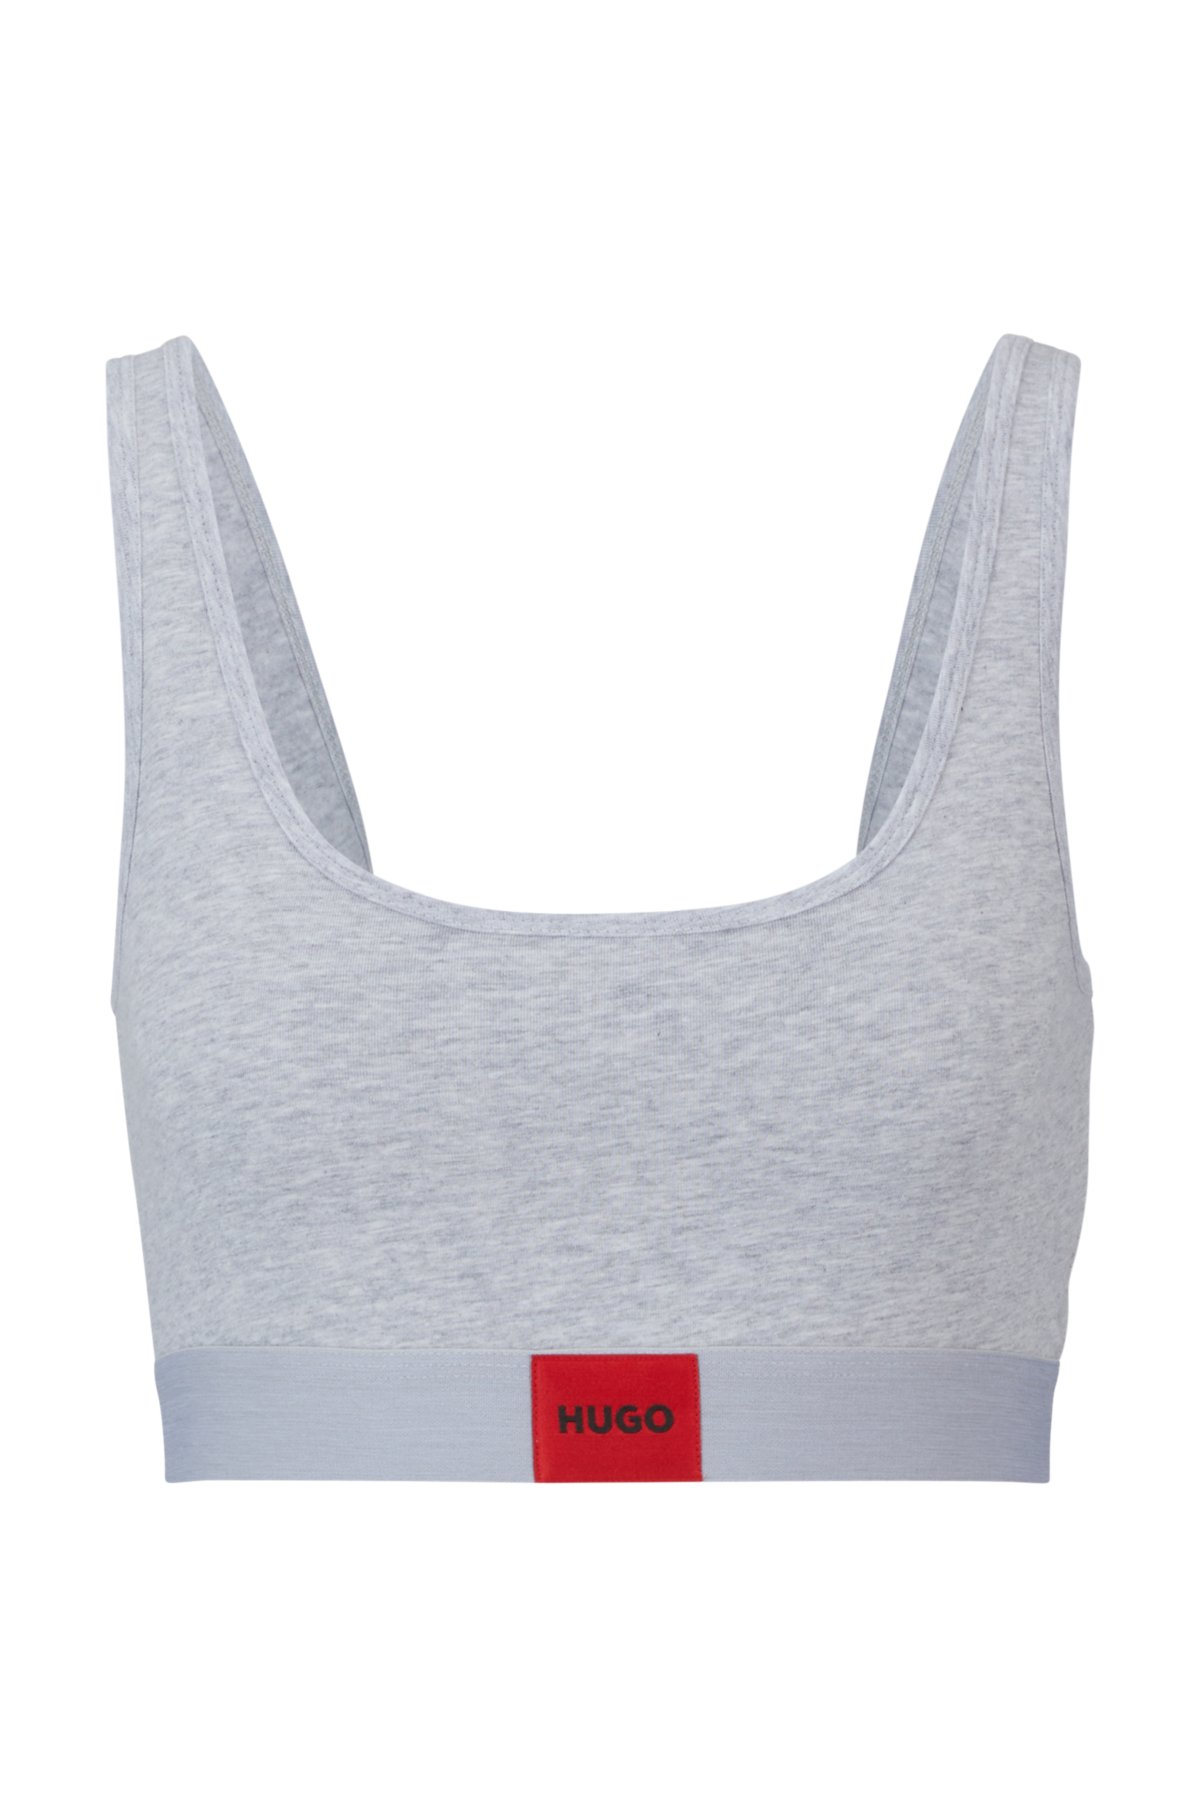 HUGO - Stretch-cotton bralette with label red logo